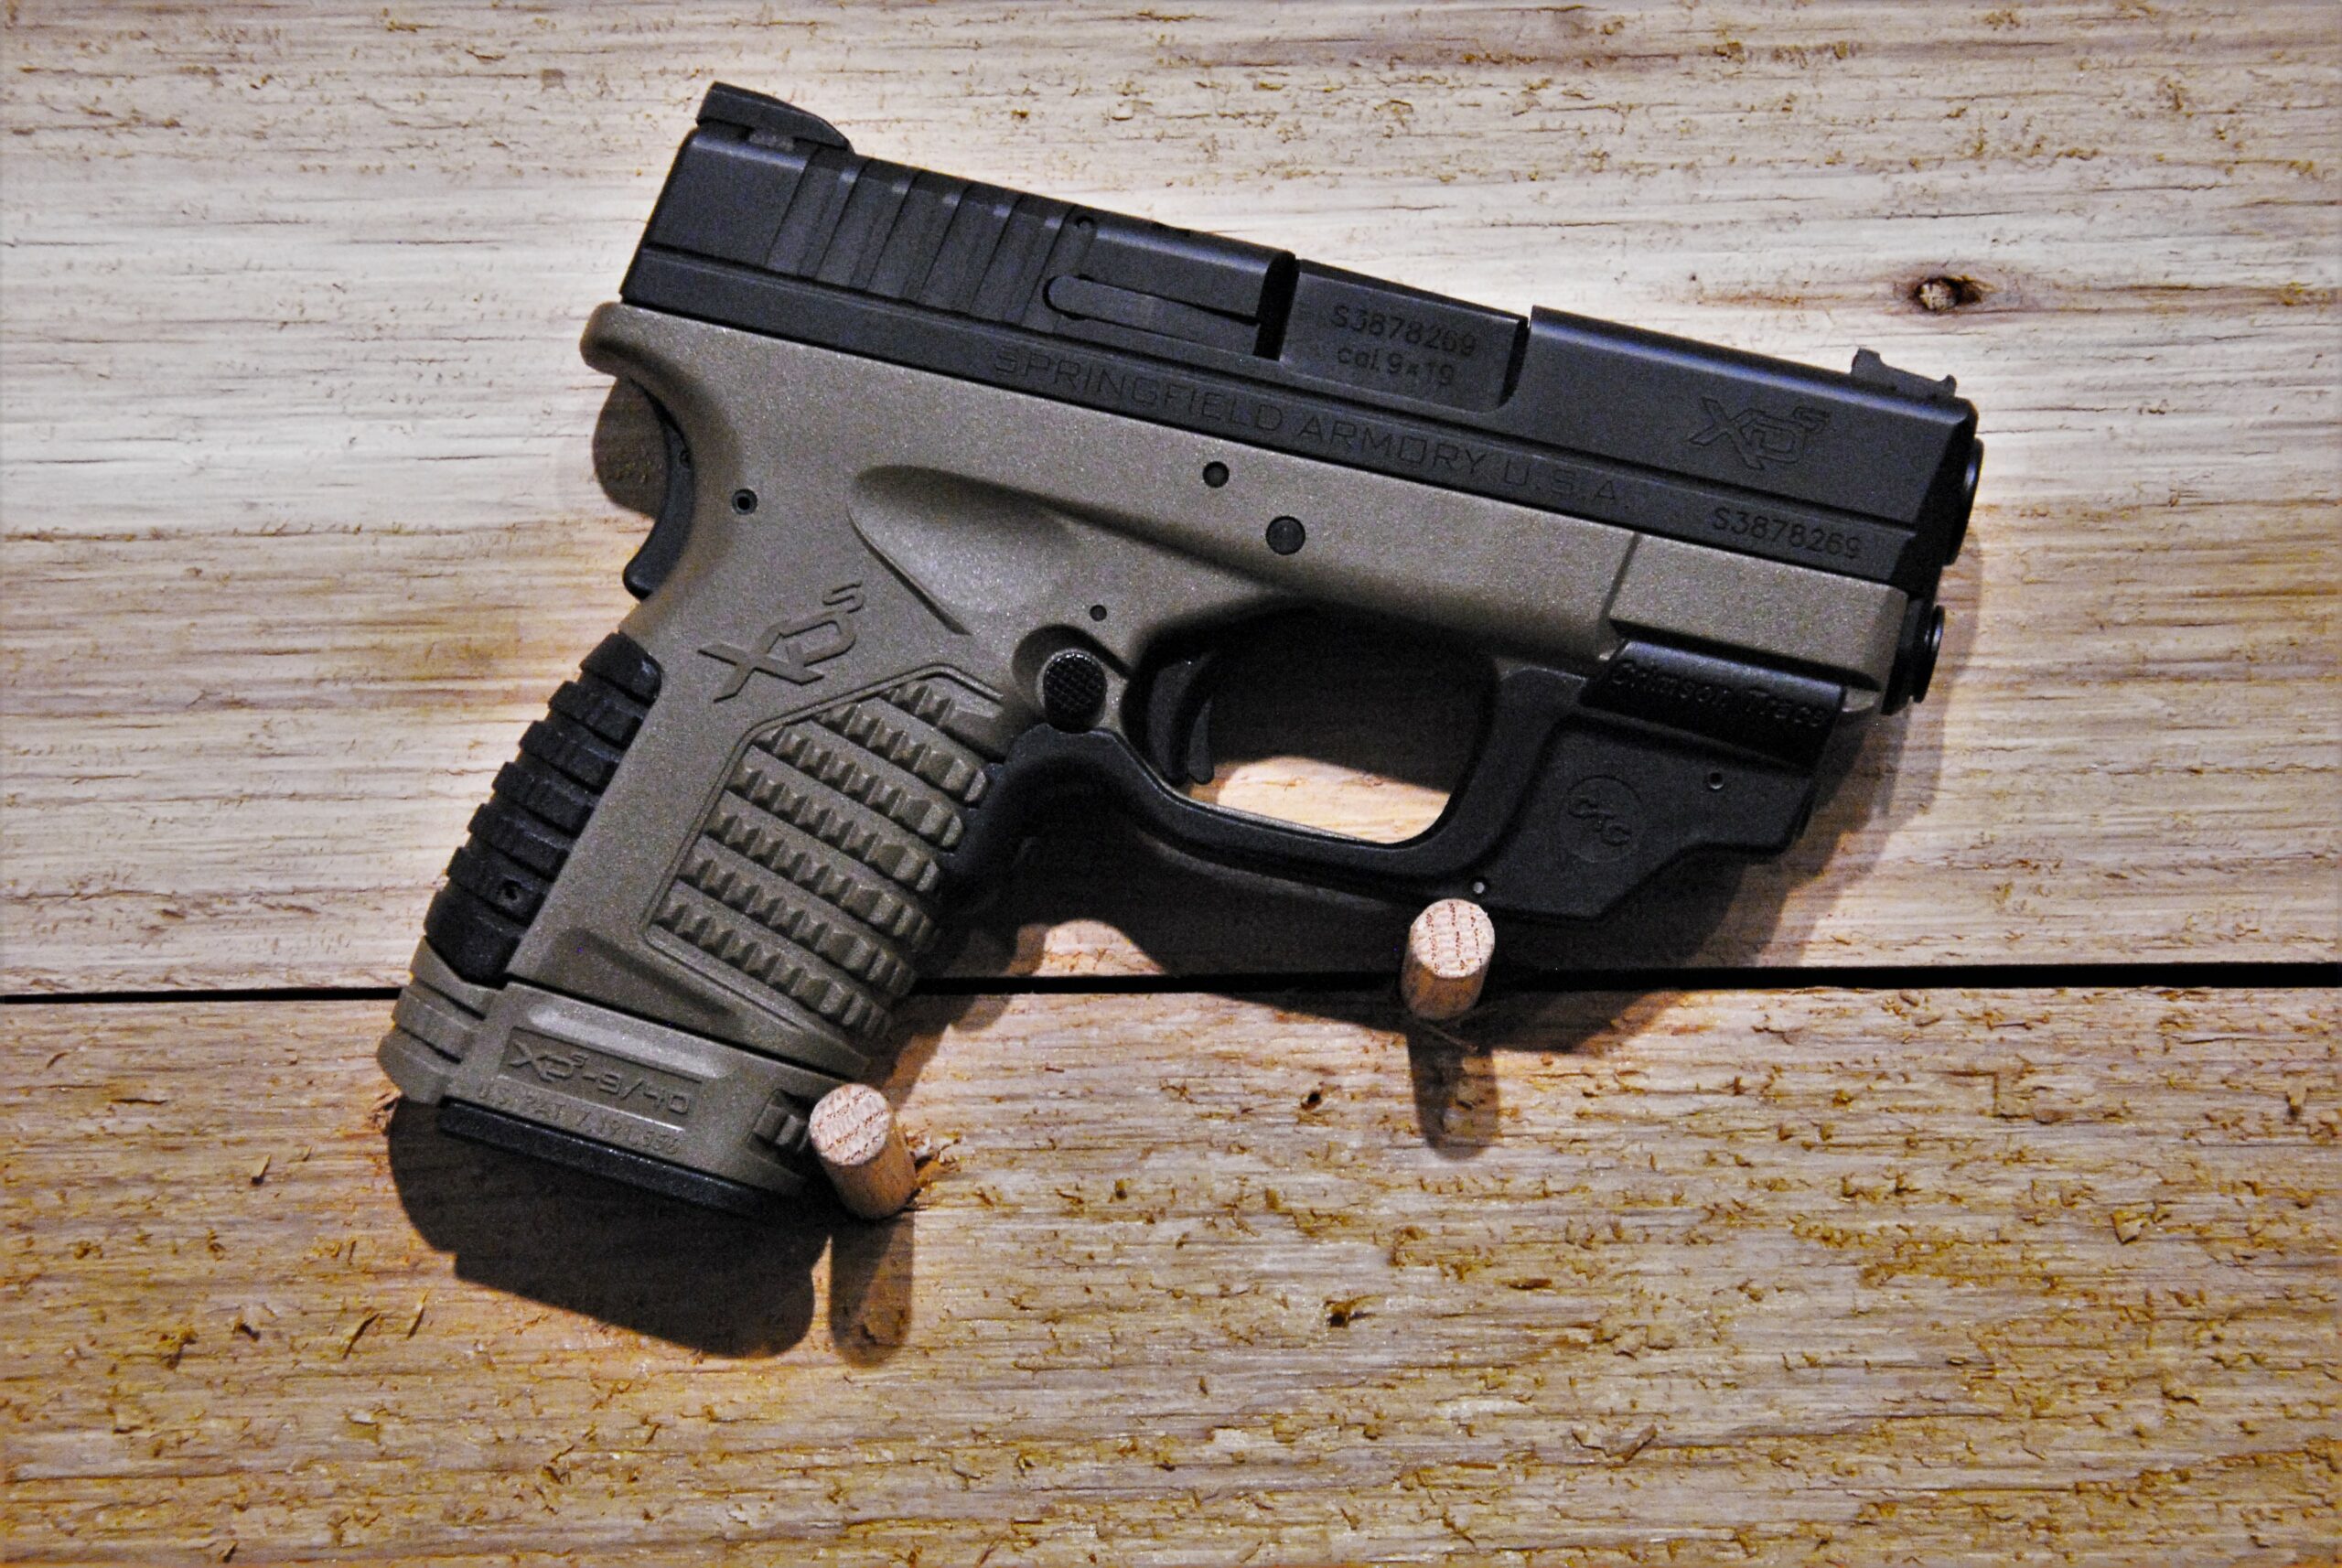 xds 9mm